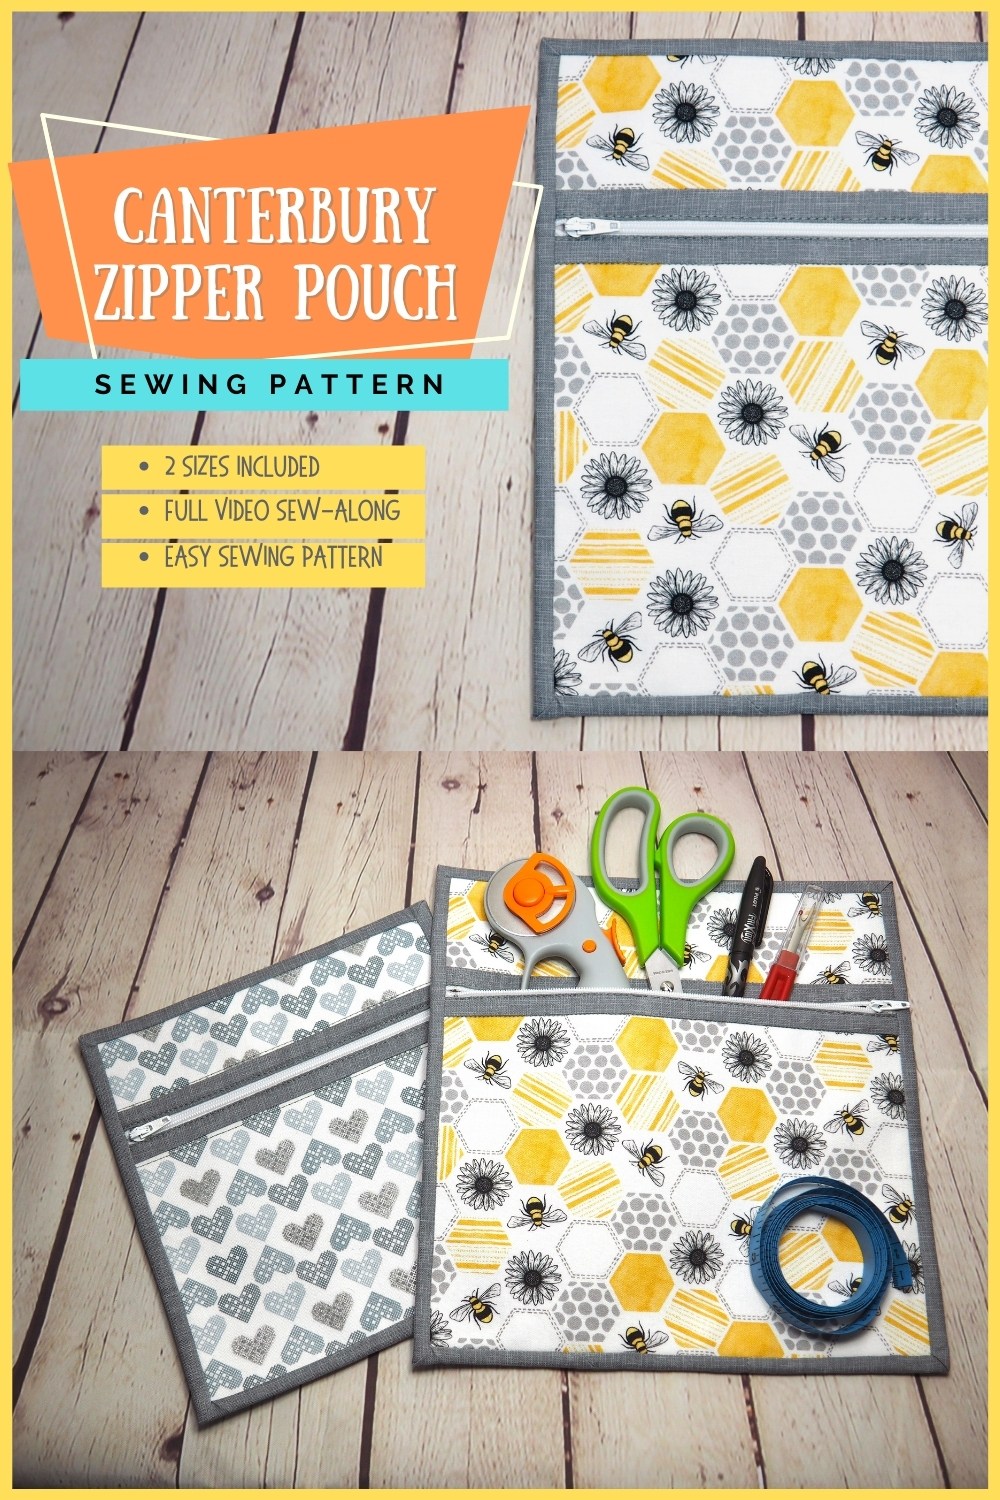 Canterbury Zipper Pouch sewing pattern in 2 sizes with video